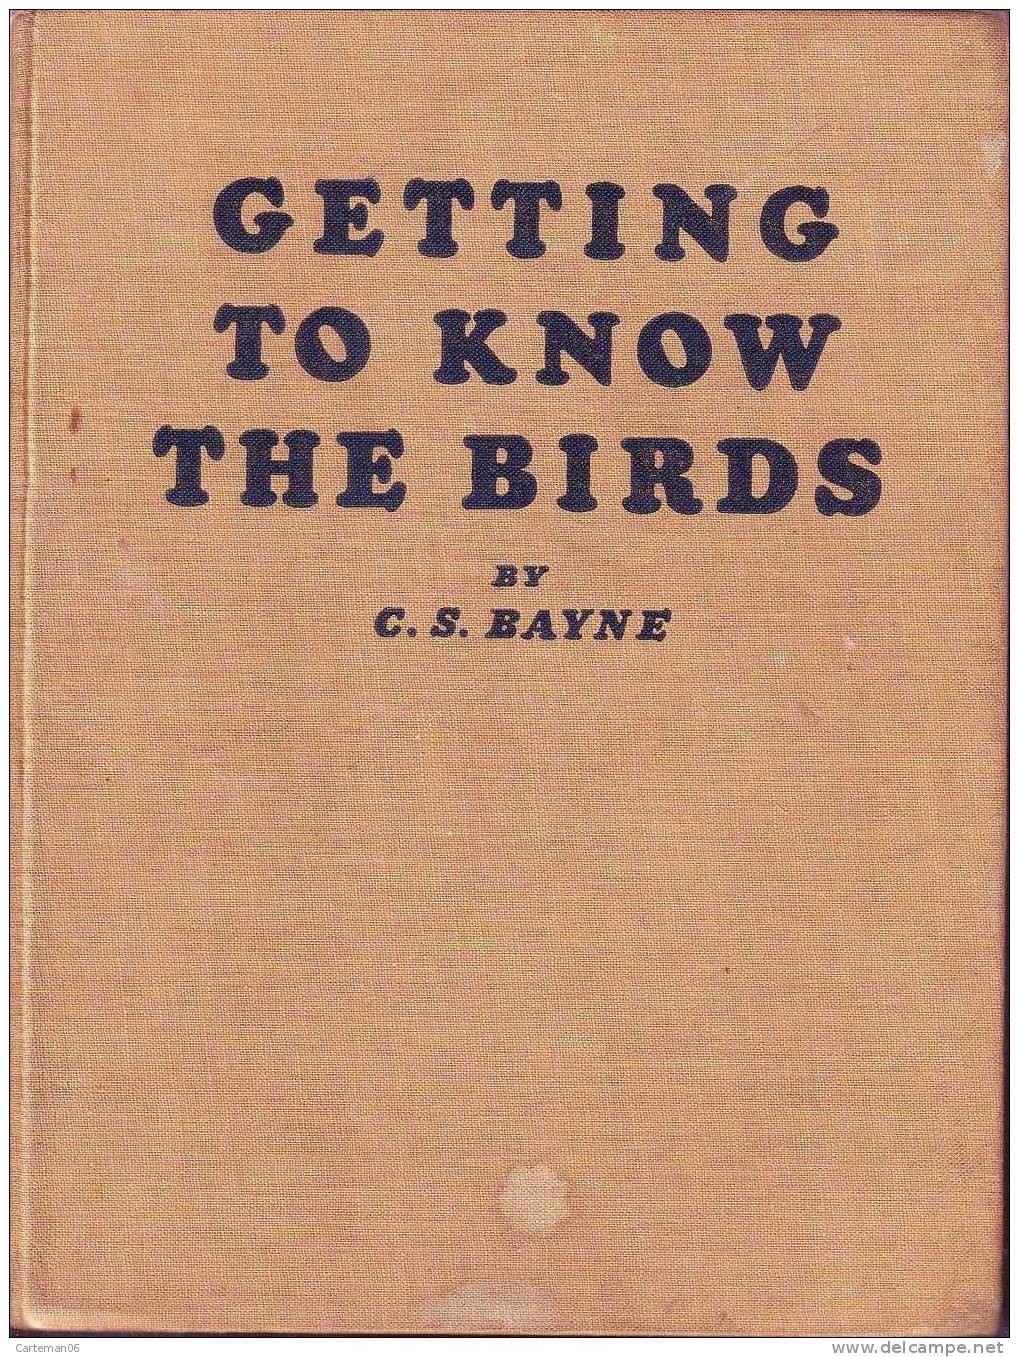 Livre - Getting To Know The Birds By C.S Bayne Illustrated By Ralston Gudgeon R.S.W 1944 (oiseaux) - Tiere